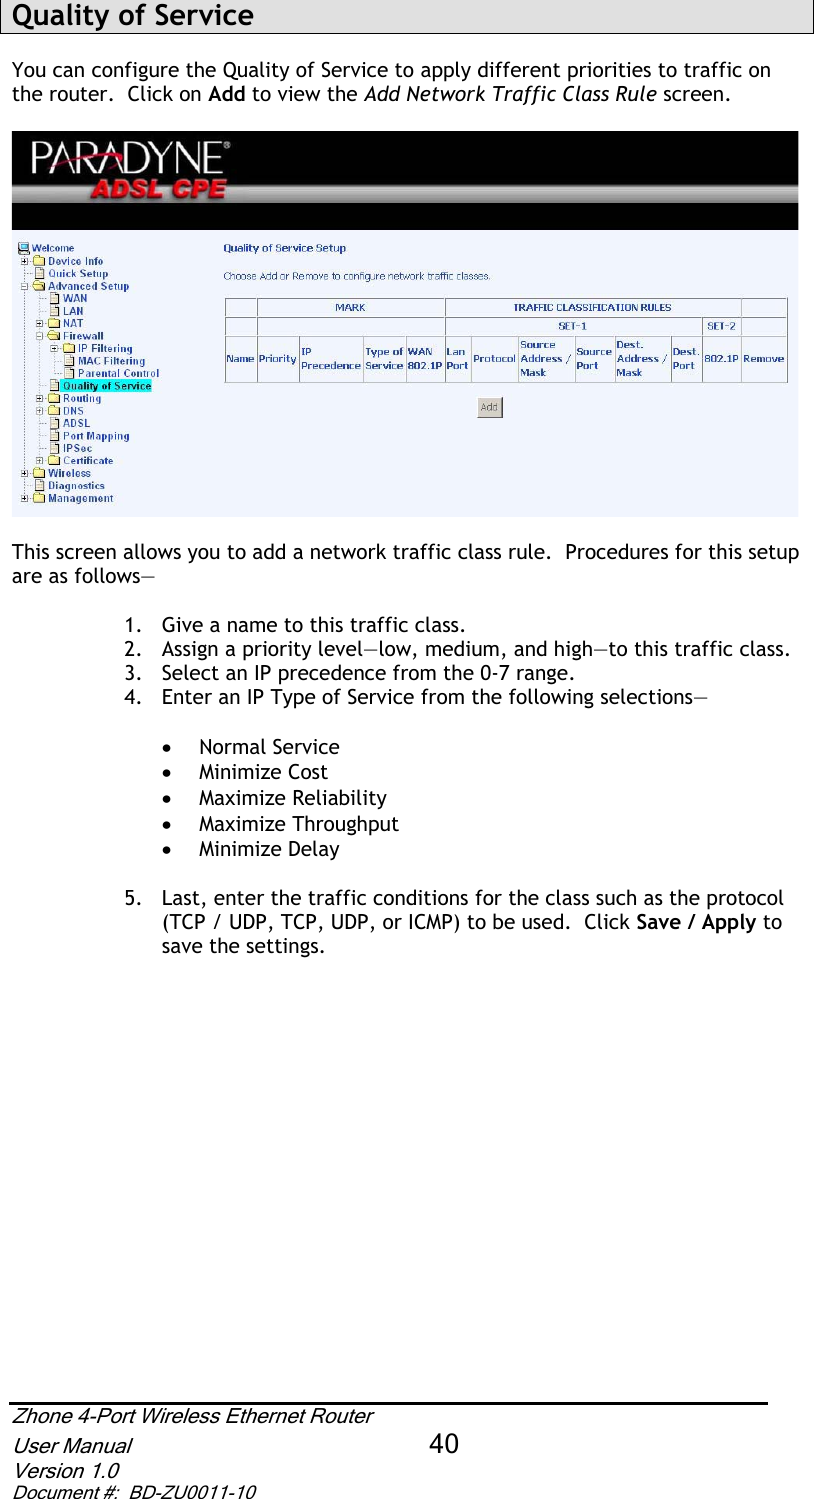 Quality of Service  You can configure the Quality of Service to apply different priorities to traffic on the router.  Click on Add to view the Add Network Traffic Class Rule screen. This screen allows you to add a network traffic class rule.  Procedures for this setup are as follows— 1.  Give a name to this traffic class.   2.  Assign a priority level—low, medium, and high—to this traffic class. 3.  Select an IP precedence from the 0-7 range. 4.  Enter an IP Type of Service from the following selections— x Normal Service x Minimize Cost x Maximize Reliability x Maximize Throughput x Minimize Delay 5.  Last, enter the traffic conditions for the class such as the protocol (TCP / UDP, TCP, UDP, or ICMP) to be used.  Click Save / Apply tosave the settings. Zhone 4-Port Wireless Ethernet Router User Manual 40Version 1.0 Document #:  BD-ZU0011-10